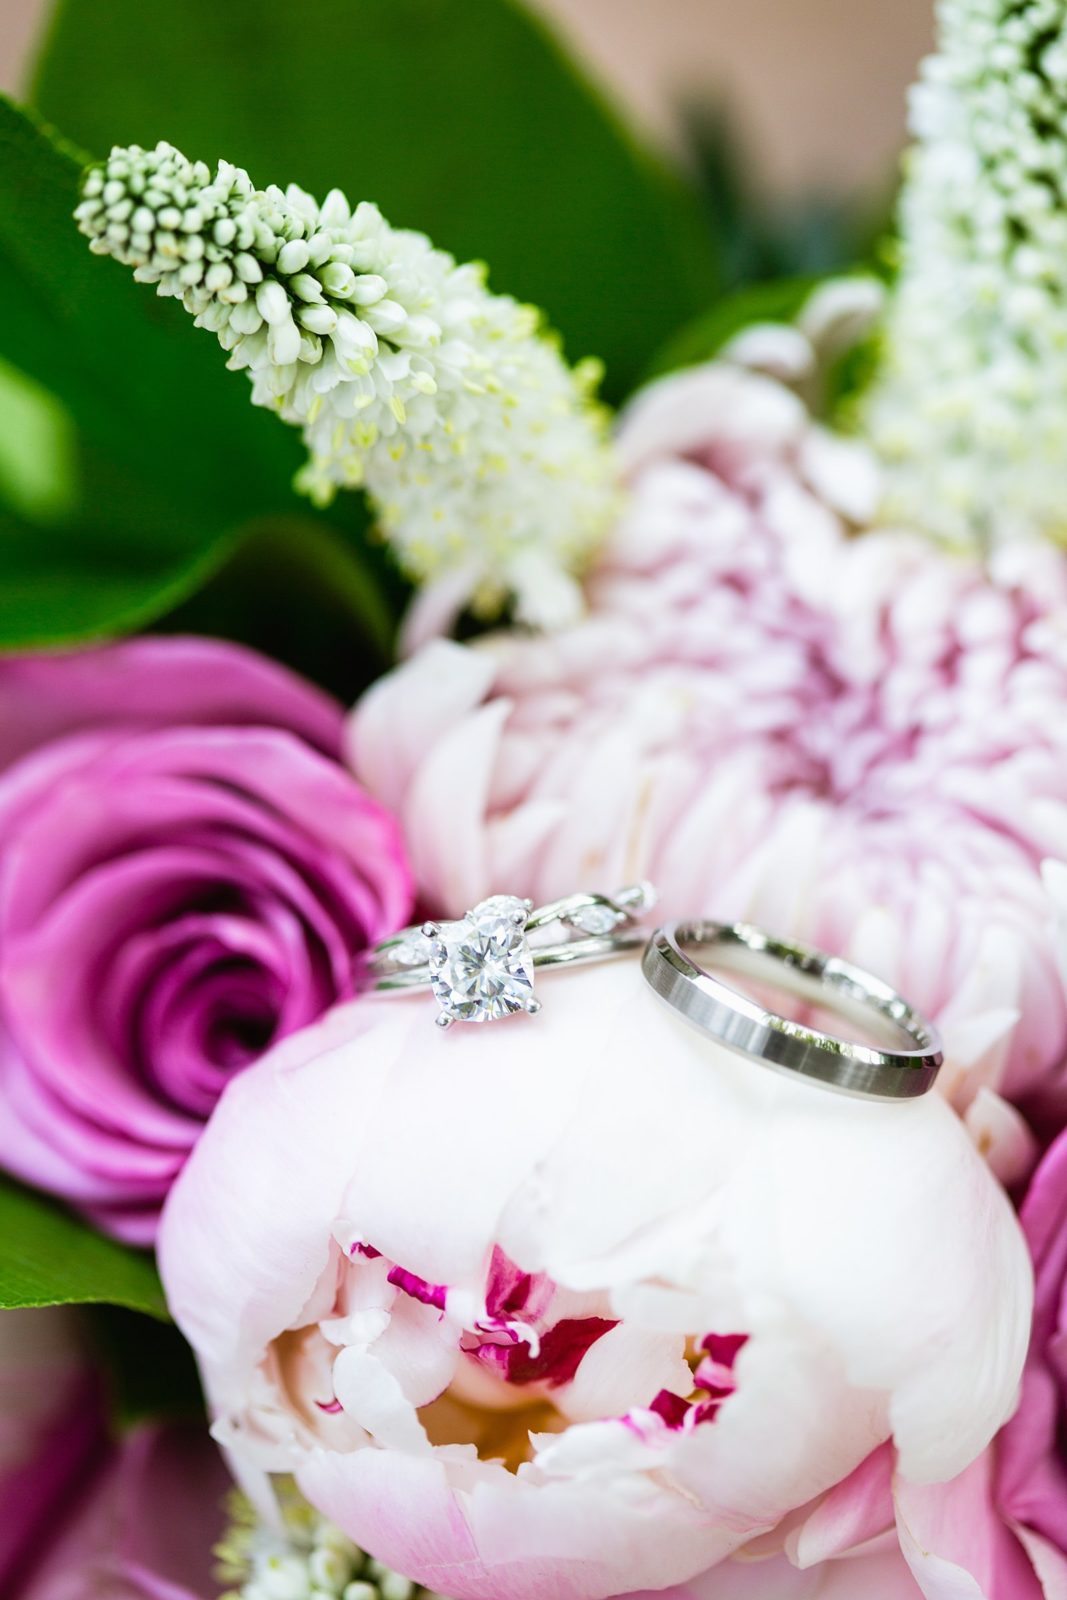 White gold garden inspired wedding rings in a pink garden inspired bouquet by Mesa wedding photographer PMA Photography.